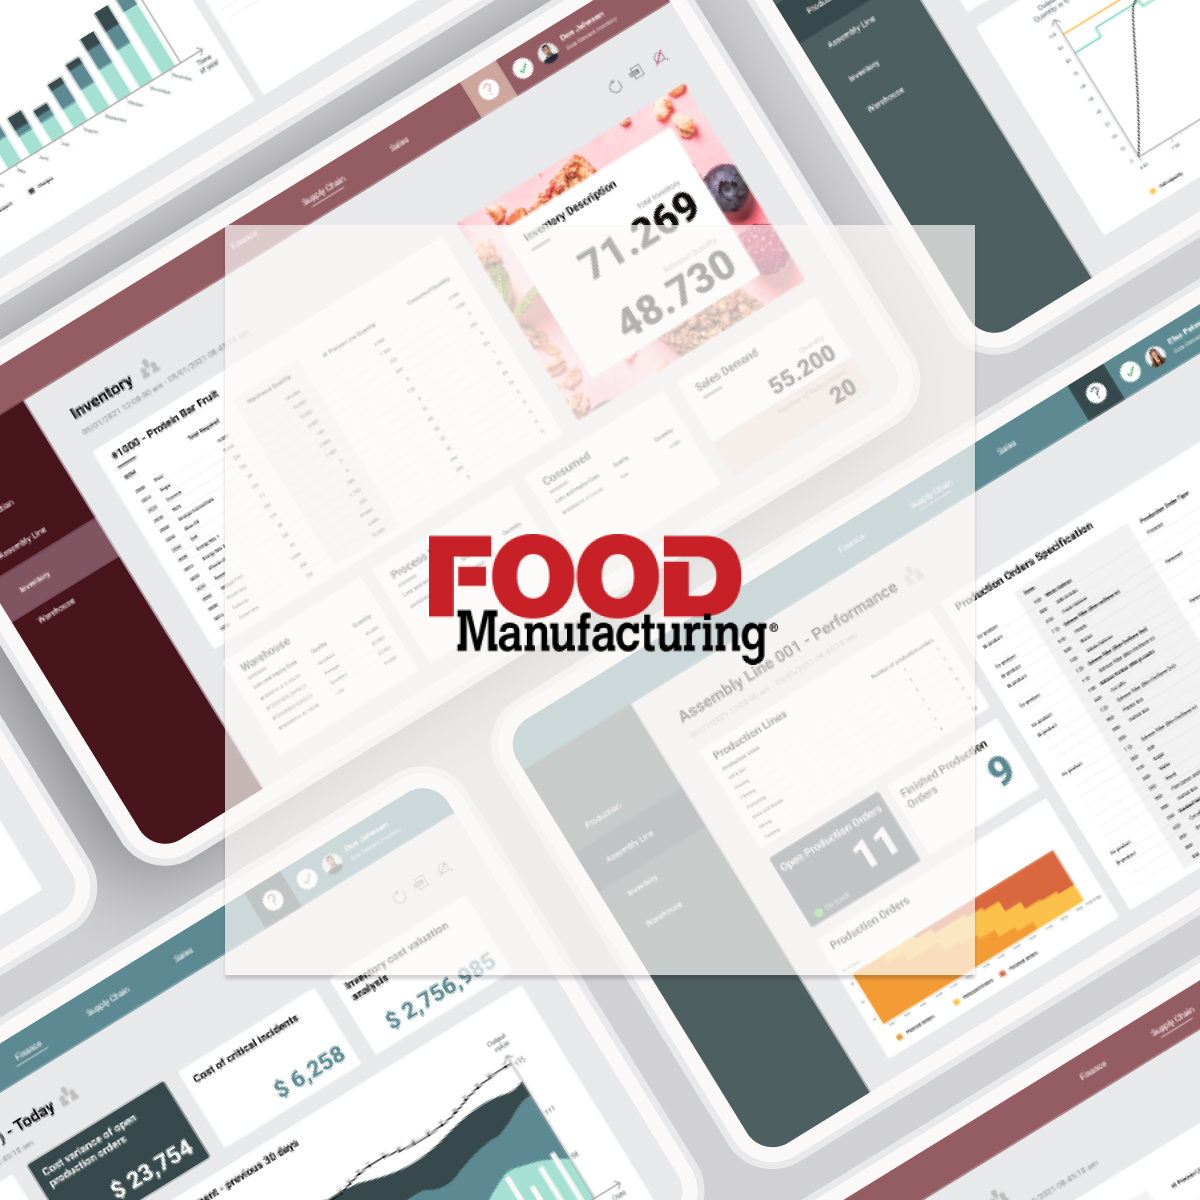 From Analytics to Action in Food Manufacturing